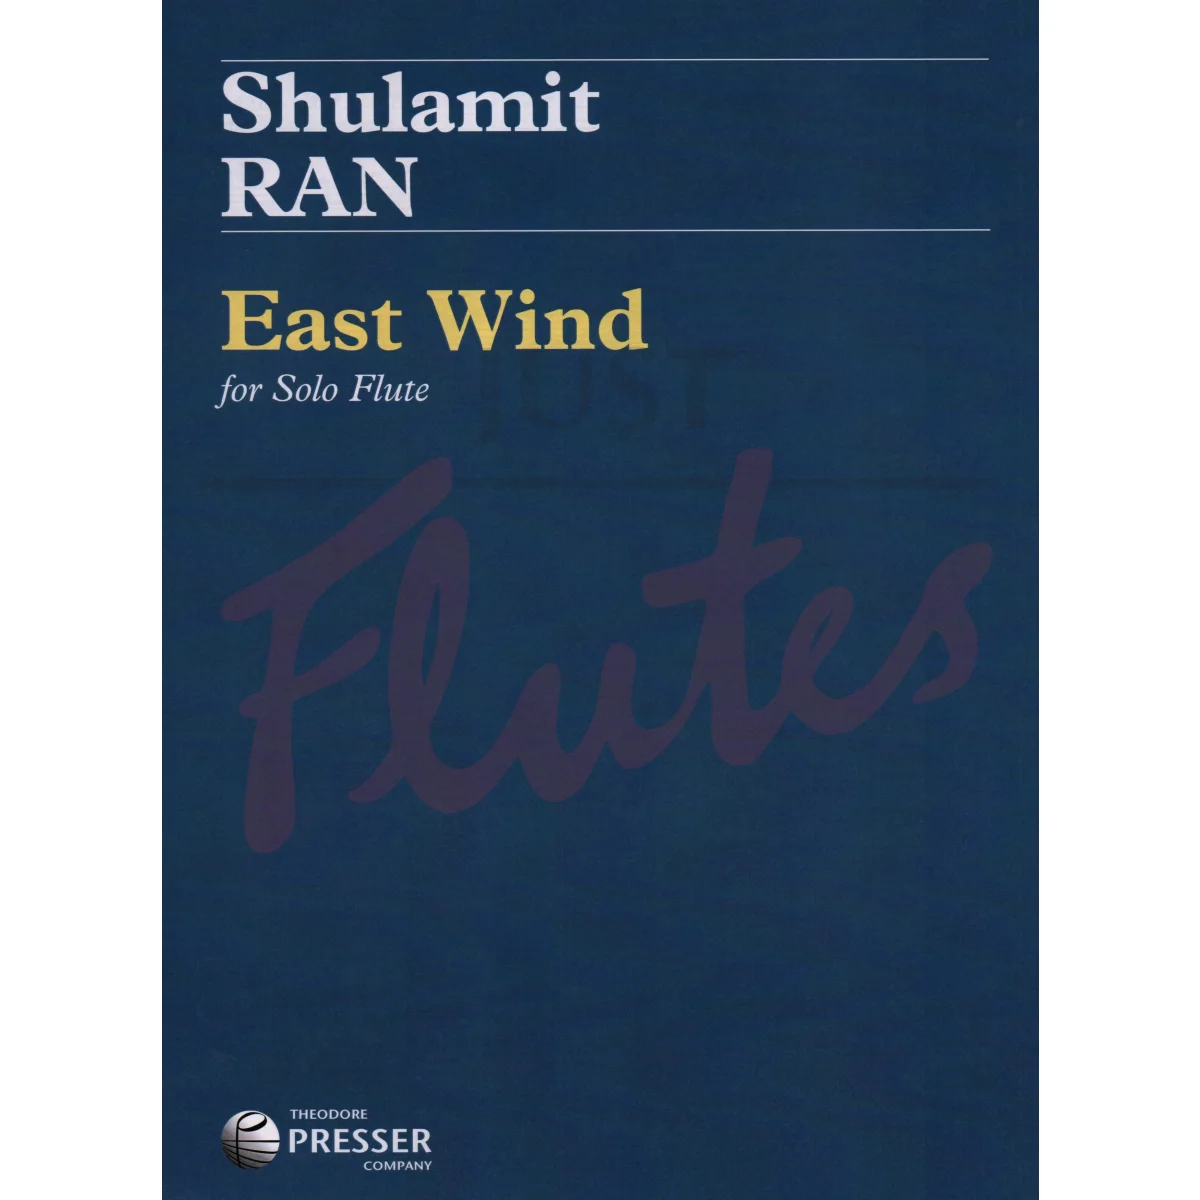 East Wind for Solo Flute